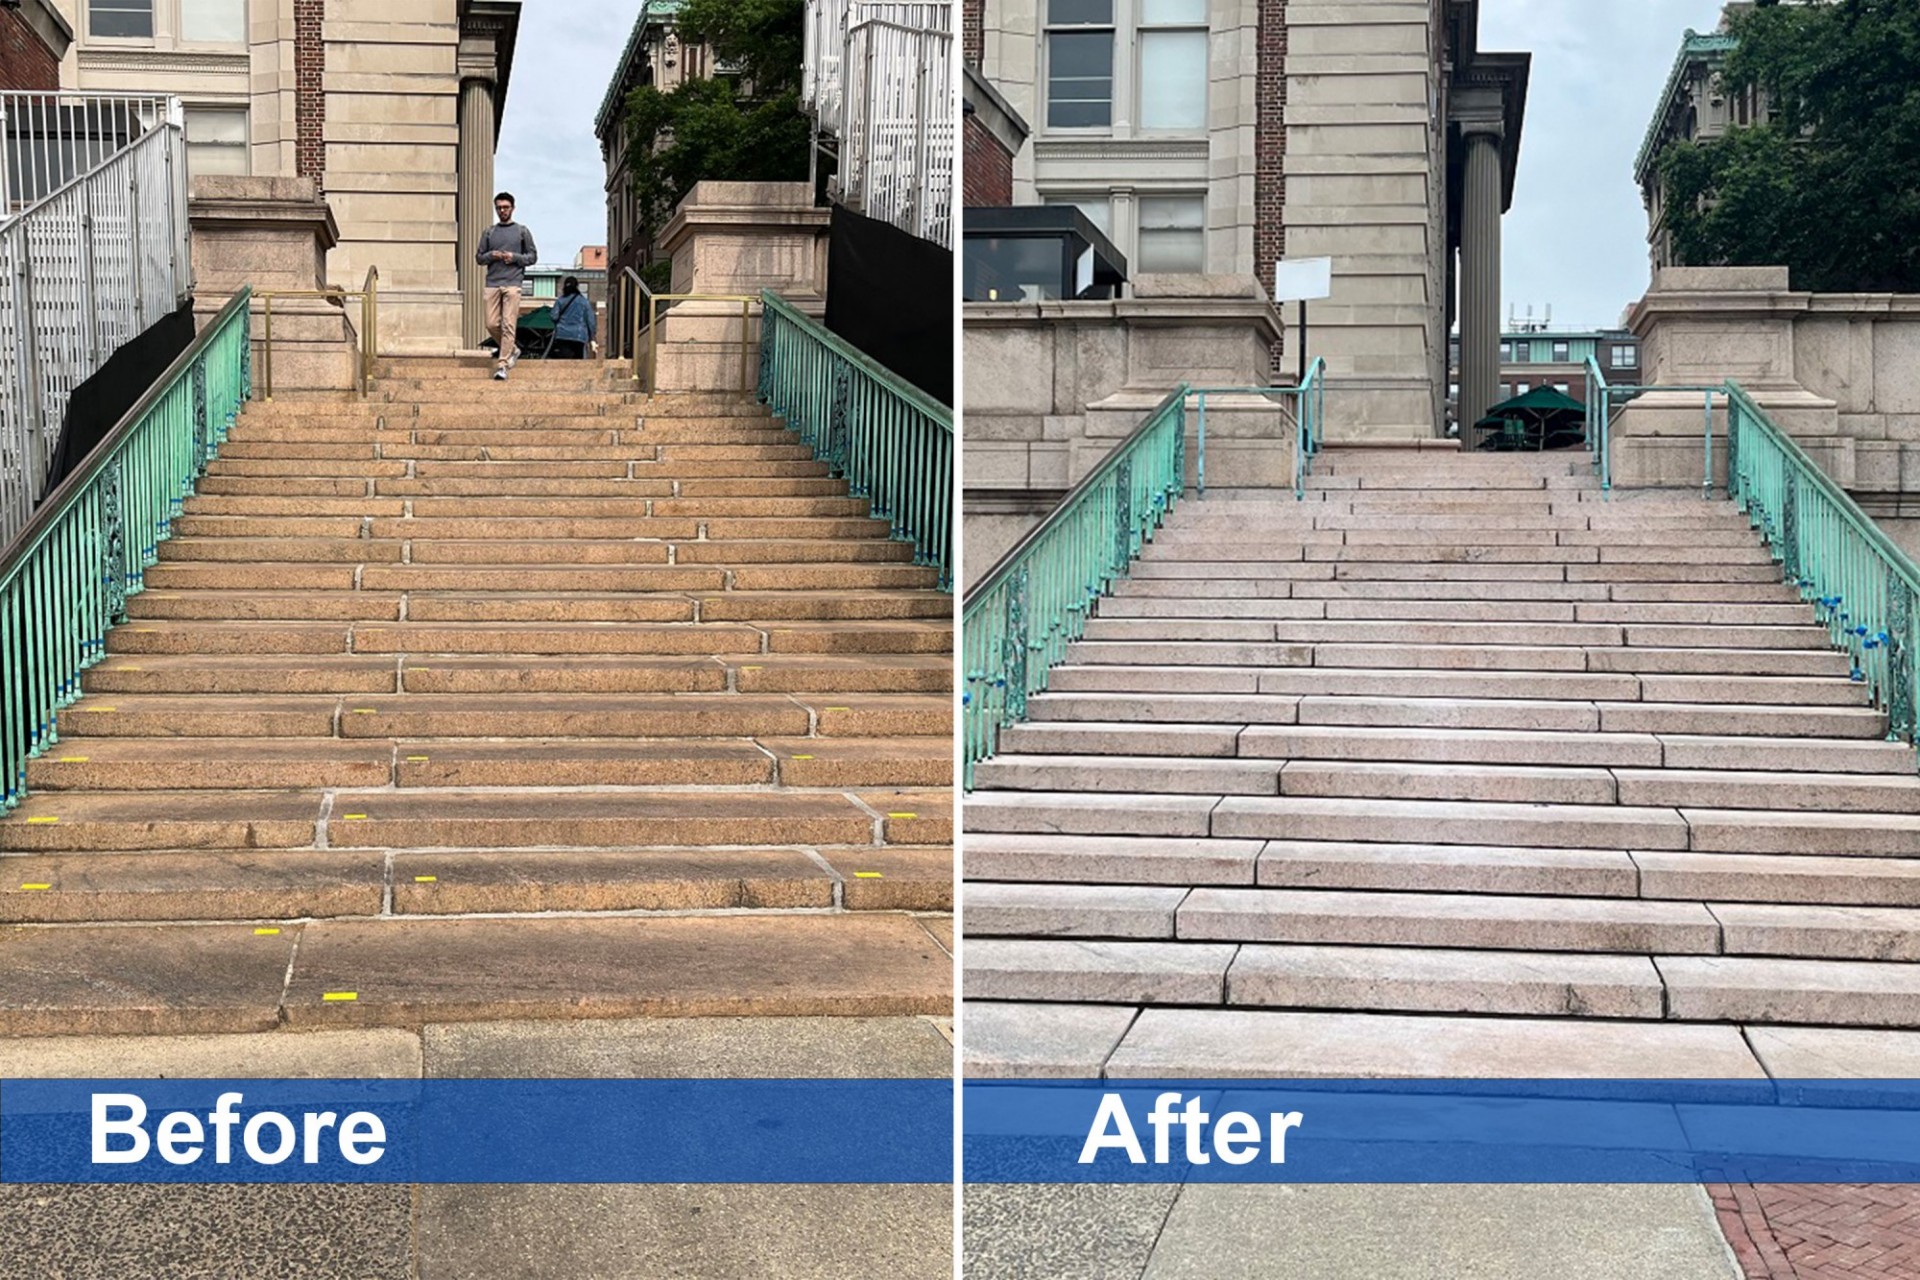 Before and after photos of the staircase between Low Plaza and Dodge Hall, showcasing the refurbished and cleaned steps.